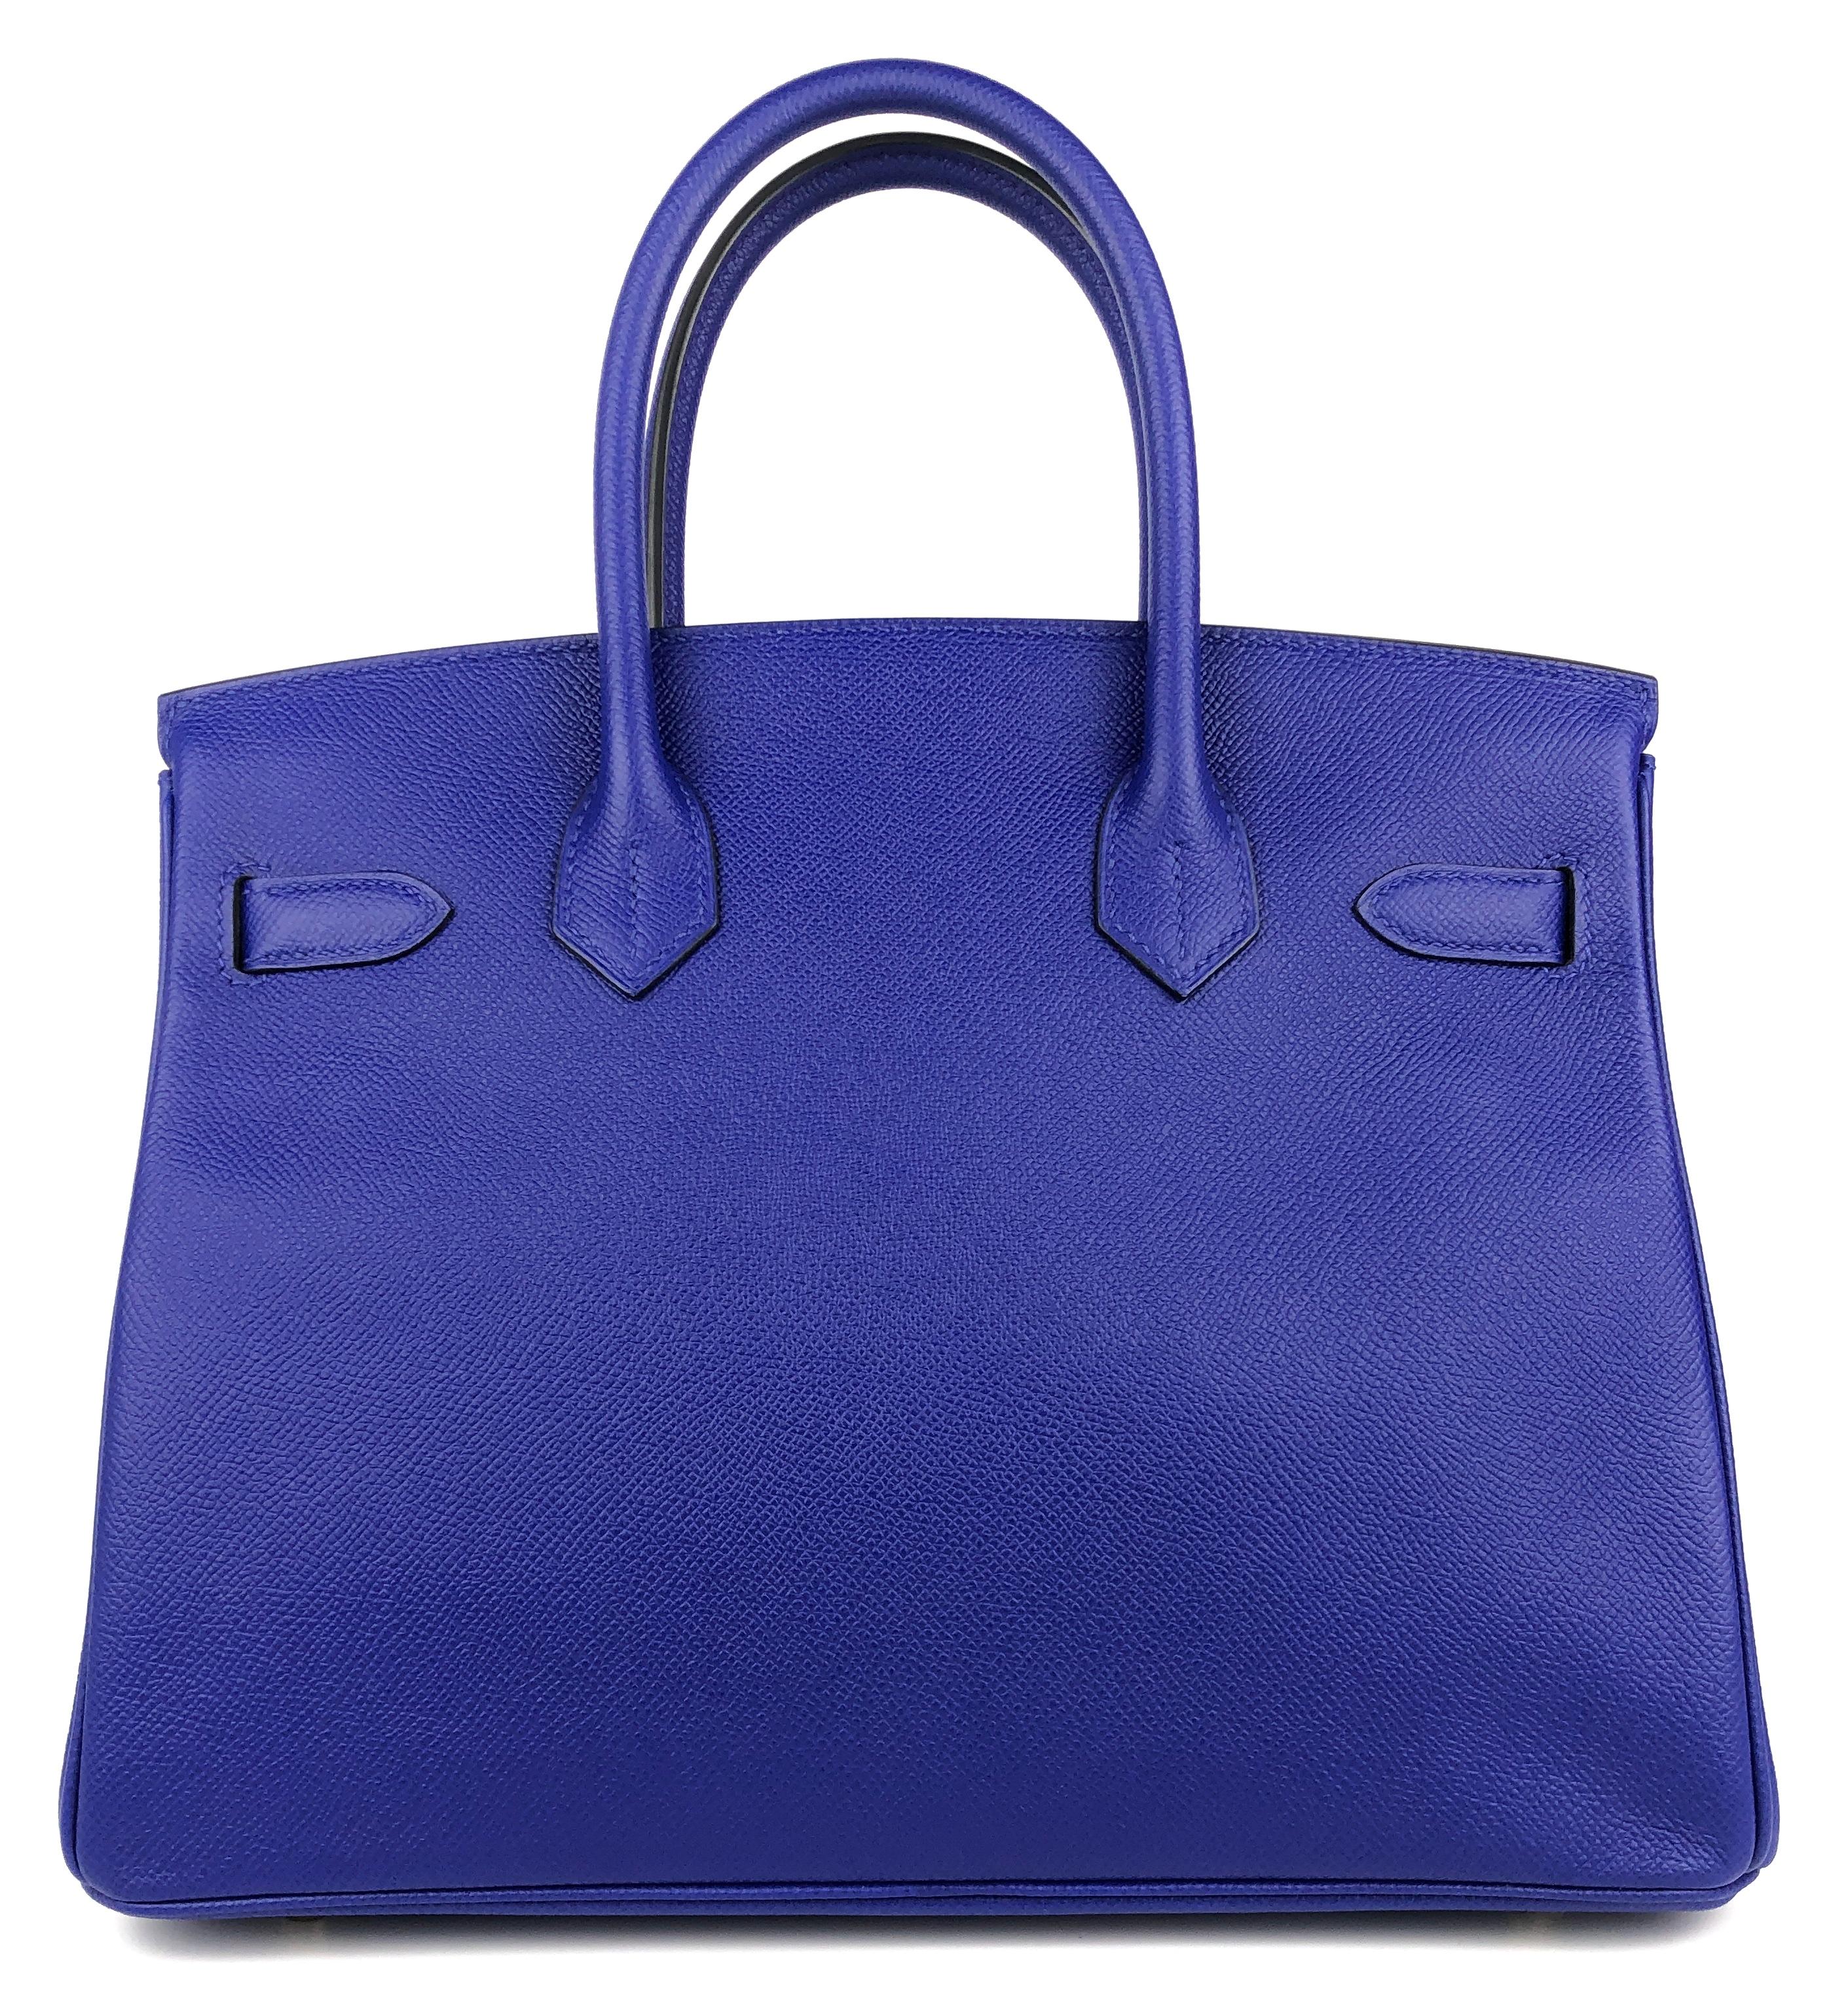 Hermes Birkin 30 Blue Electric Epsom Leather Gold Hardware  In Excellent Condition For Sale In Miami, FL